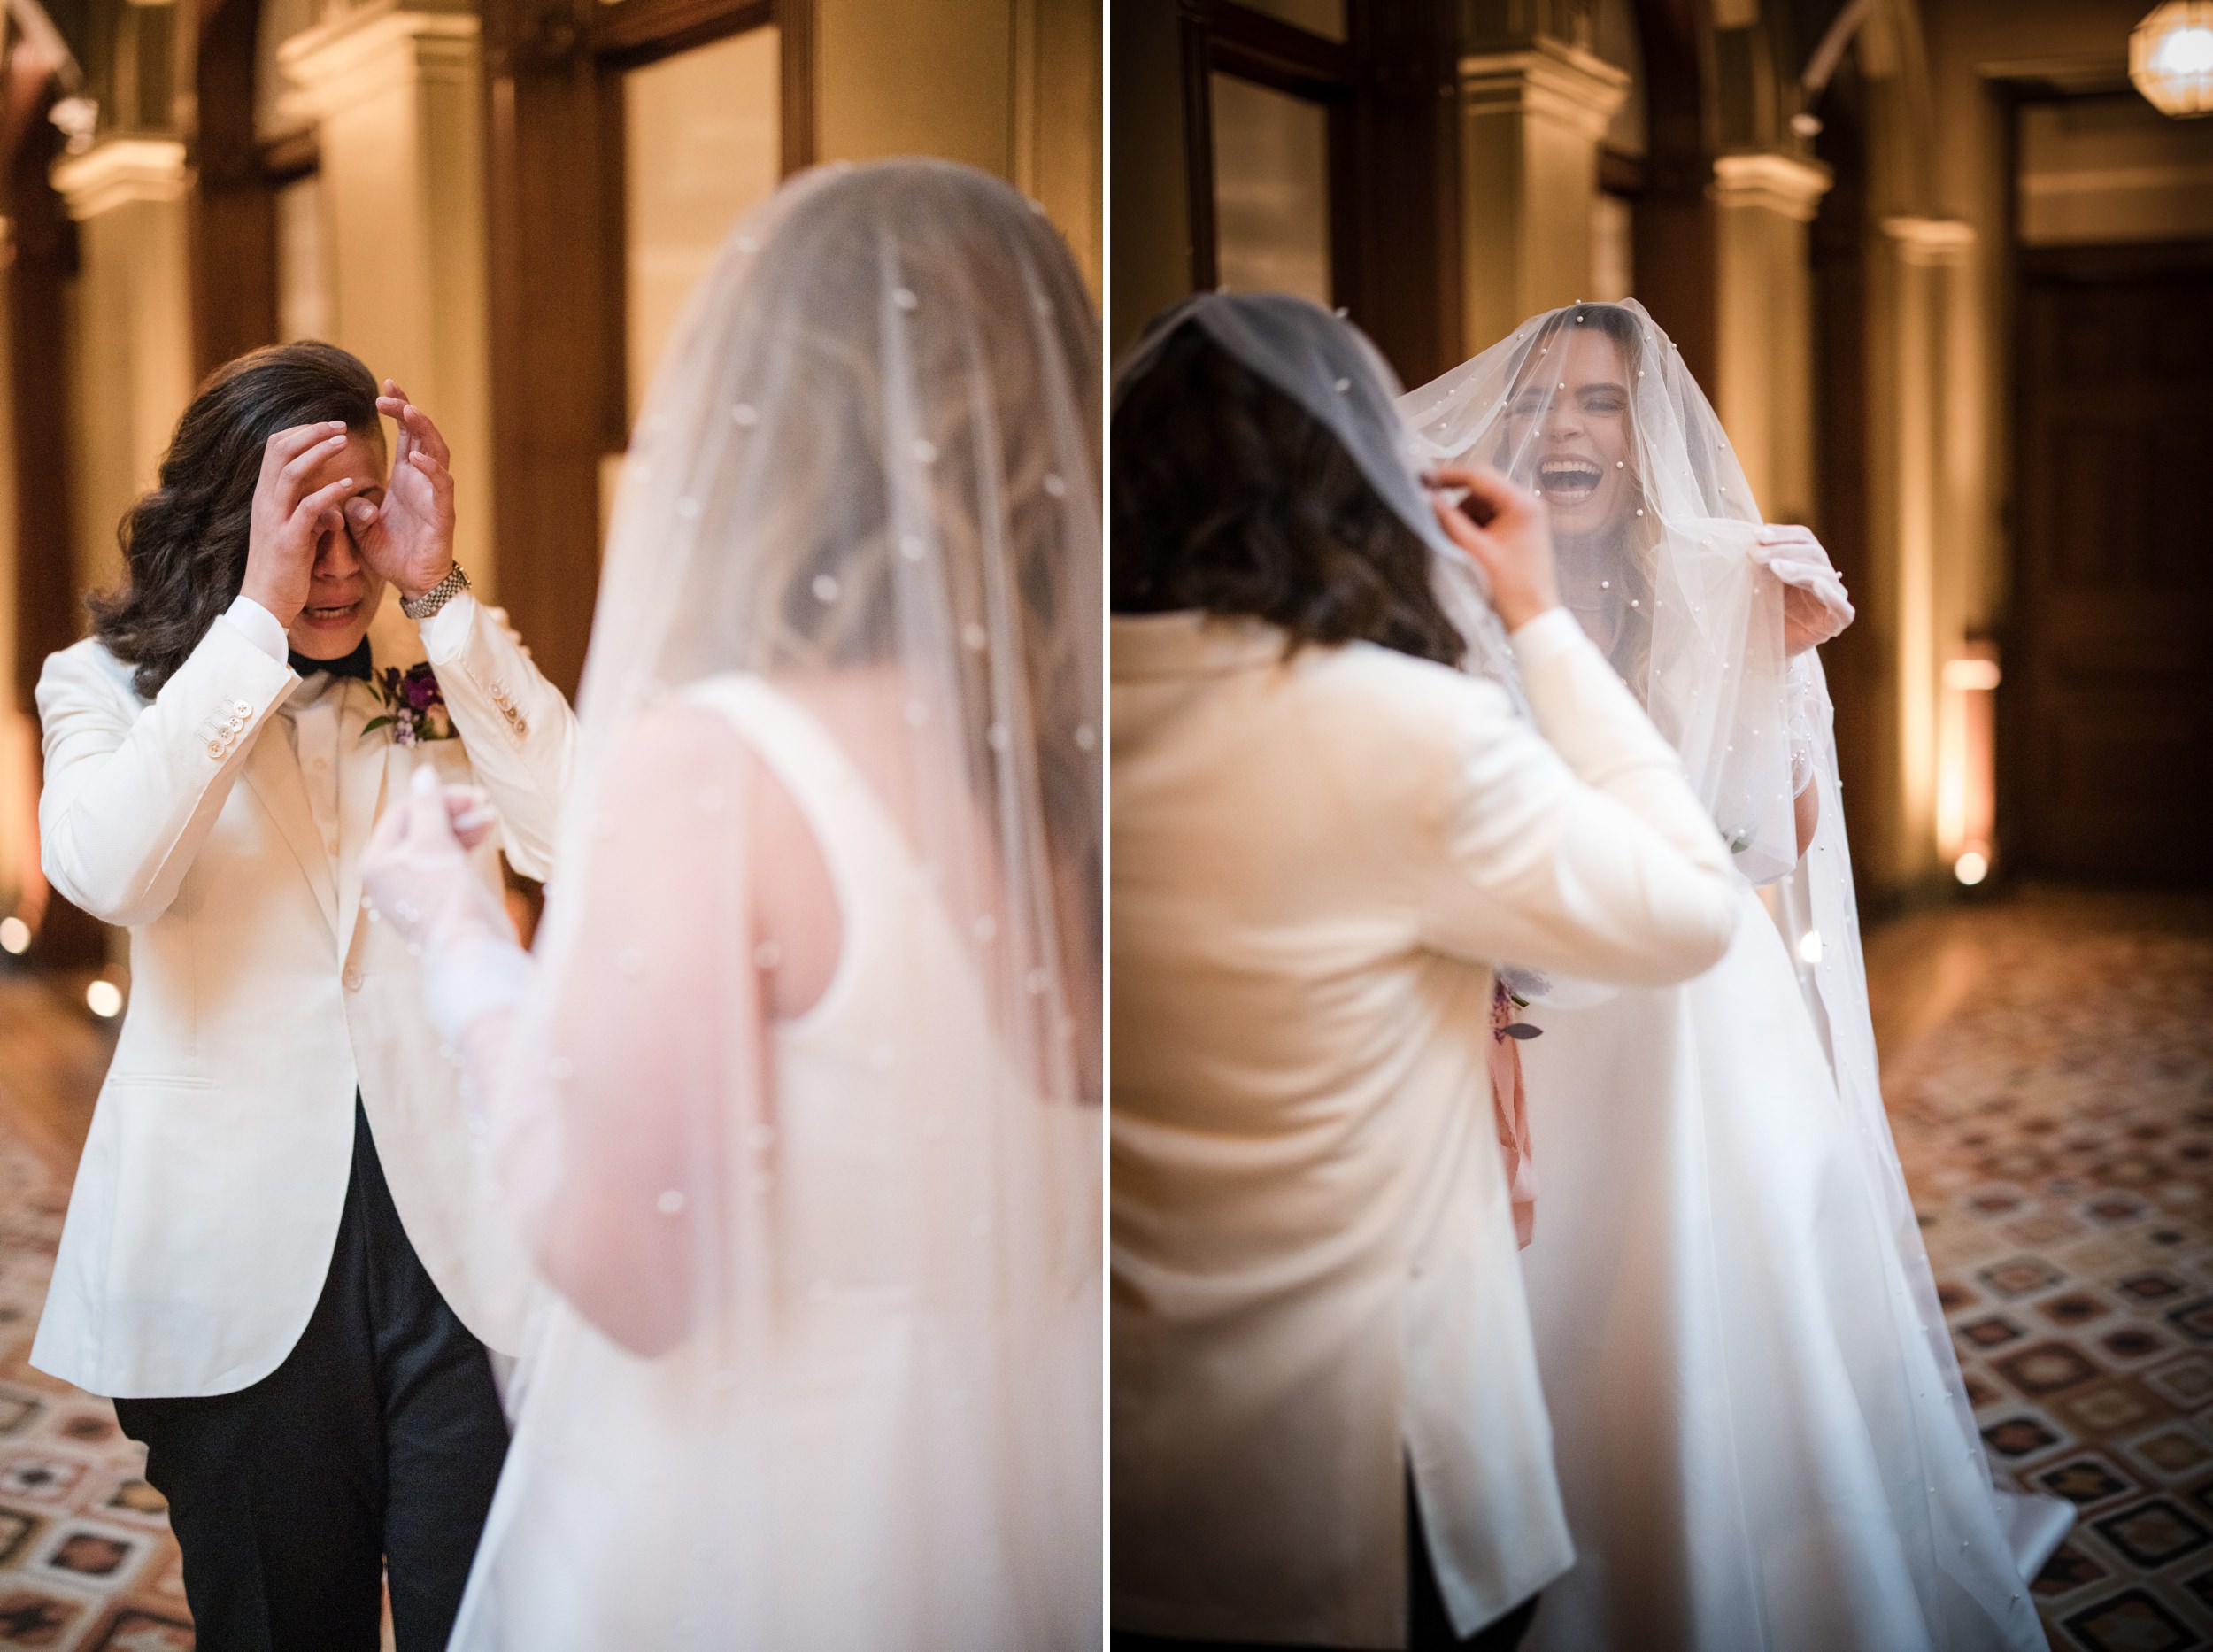 Brides seeing each other for the first time at a Beekman Hotel wedding in NYC